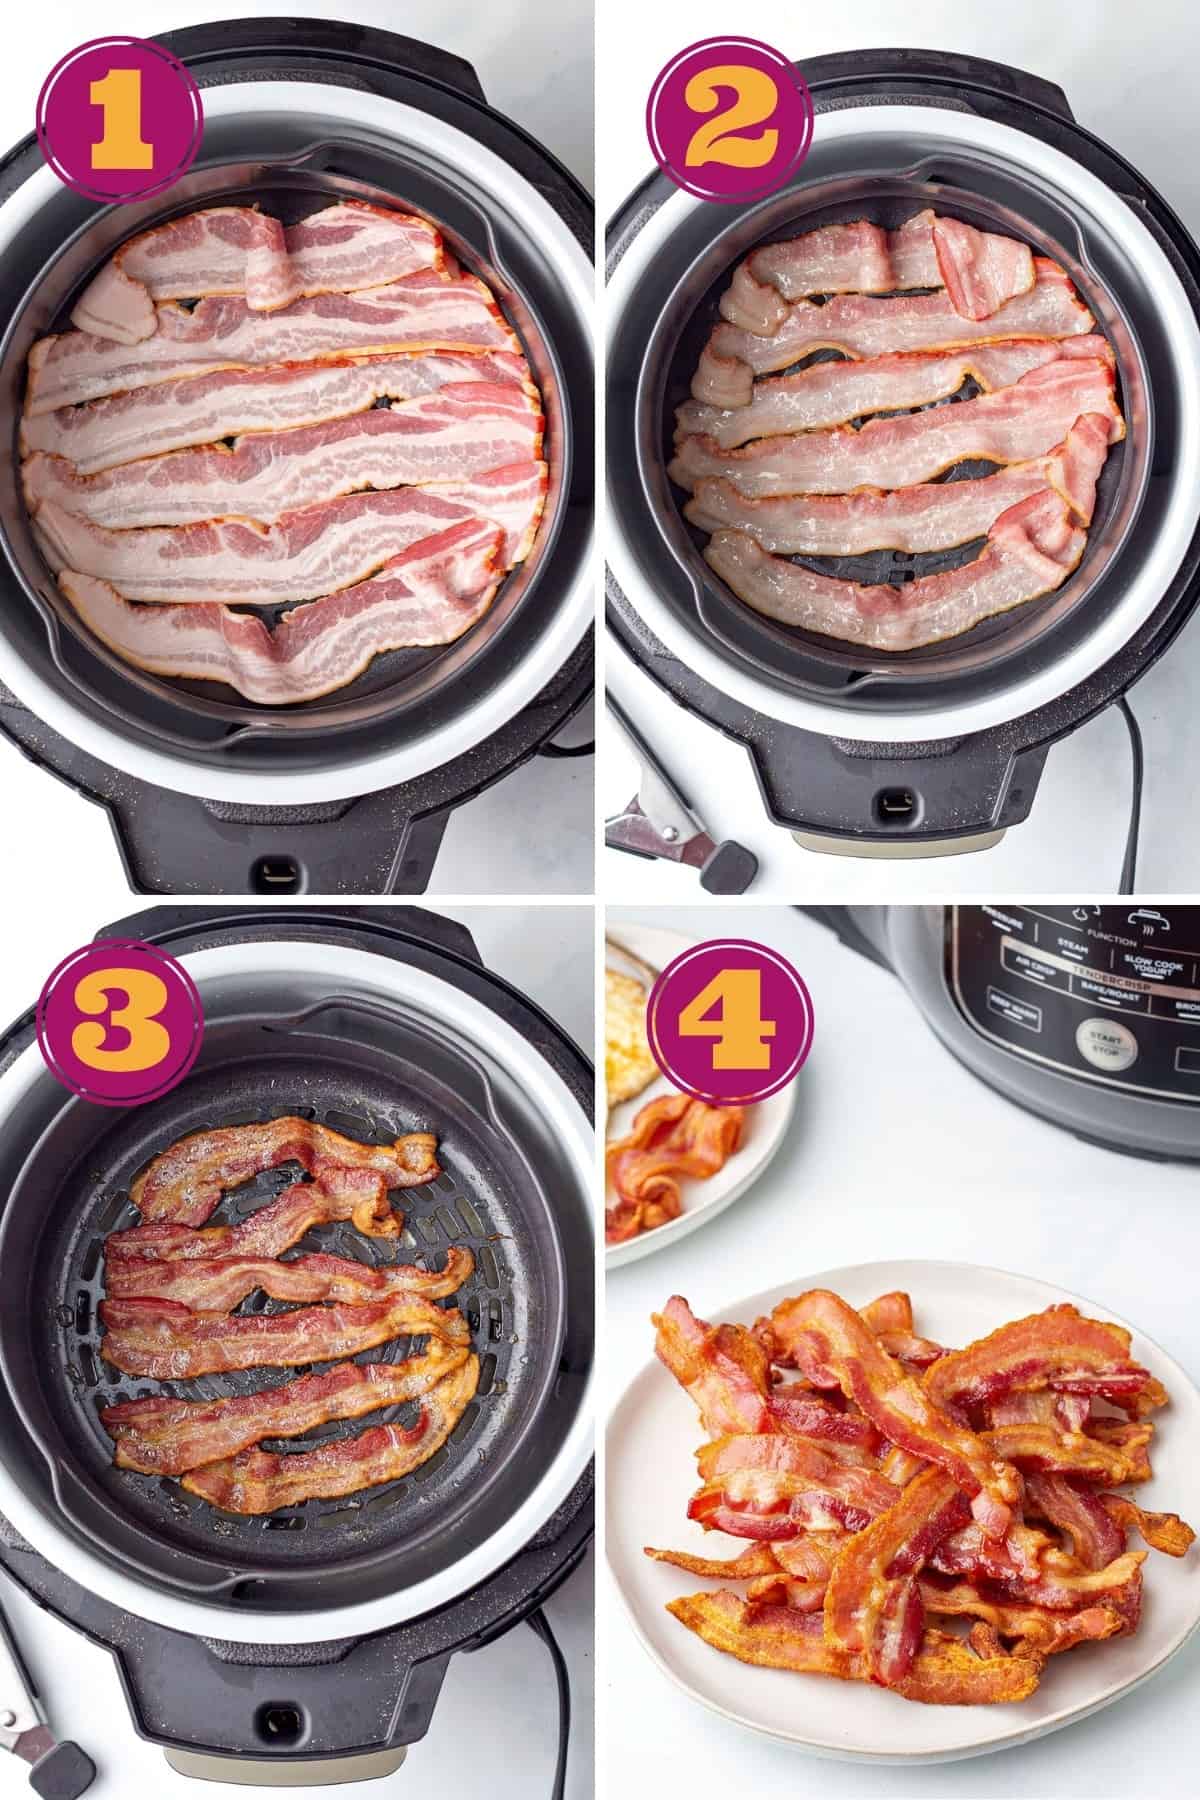 Four numbered pictures: first, an air fryer filled with uncooked bacon; second, an air fryer filled with partially-cooked bacon; third, an air fryer filled with cooked bacon; and fourth, a plate full of cooked bacon, with an air fryer in the background, and a plate of bacon and eggs in the background